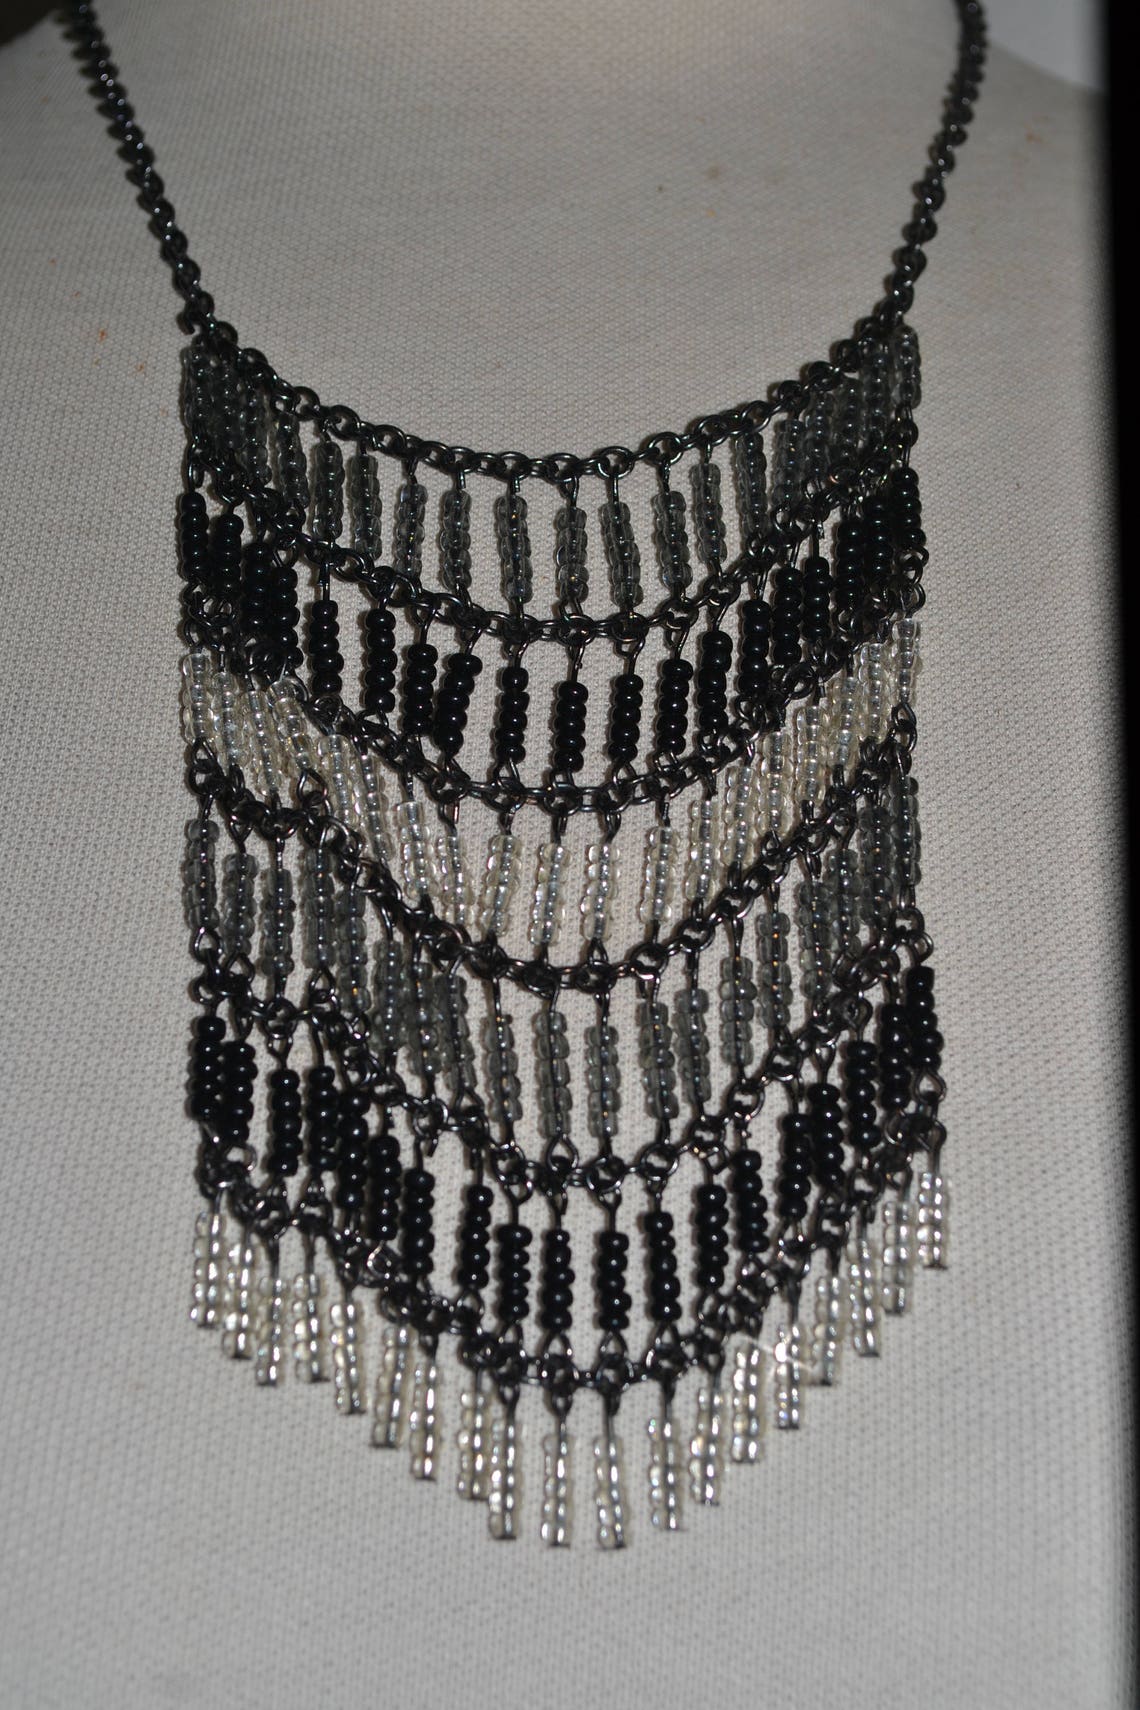 Black and White Necklace Vintage Seed Bead Choker Beaded - Etsy